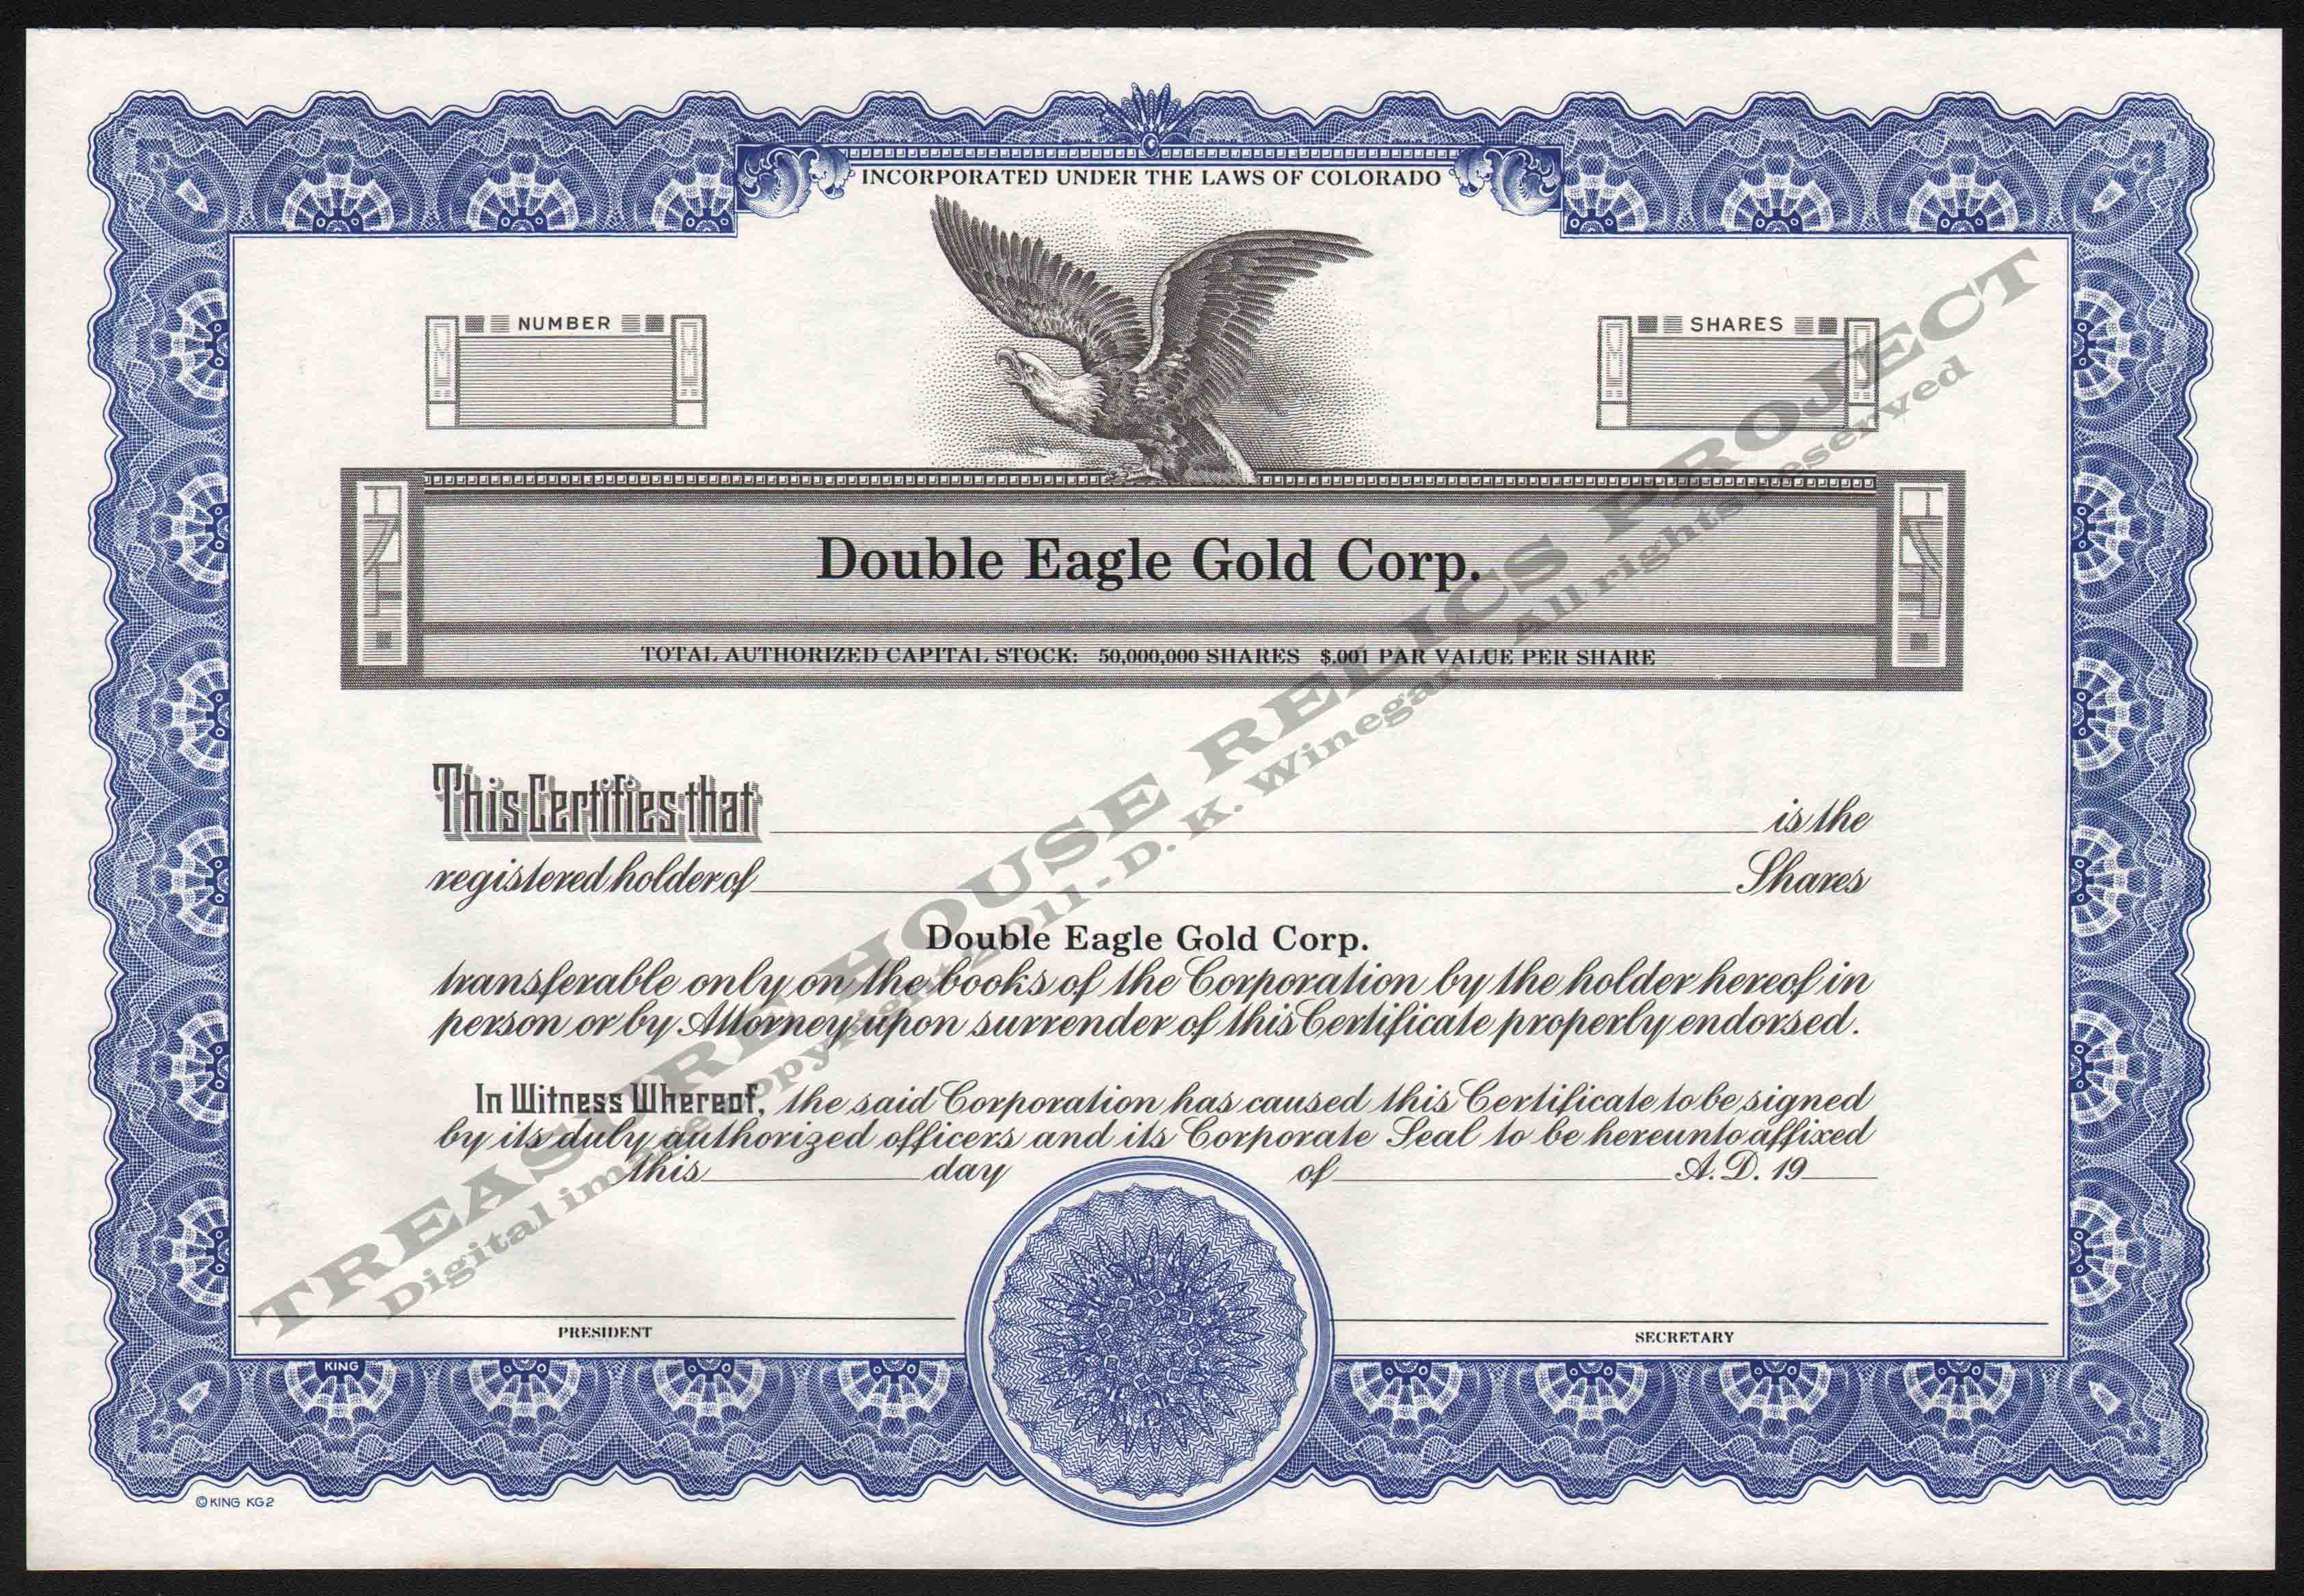 DOUBLE_EAGLE_GOLD_CORP_NNPS_300_emboss.jpg